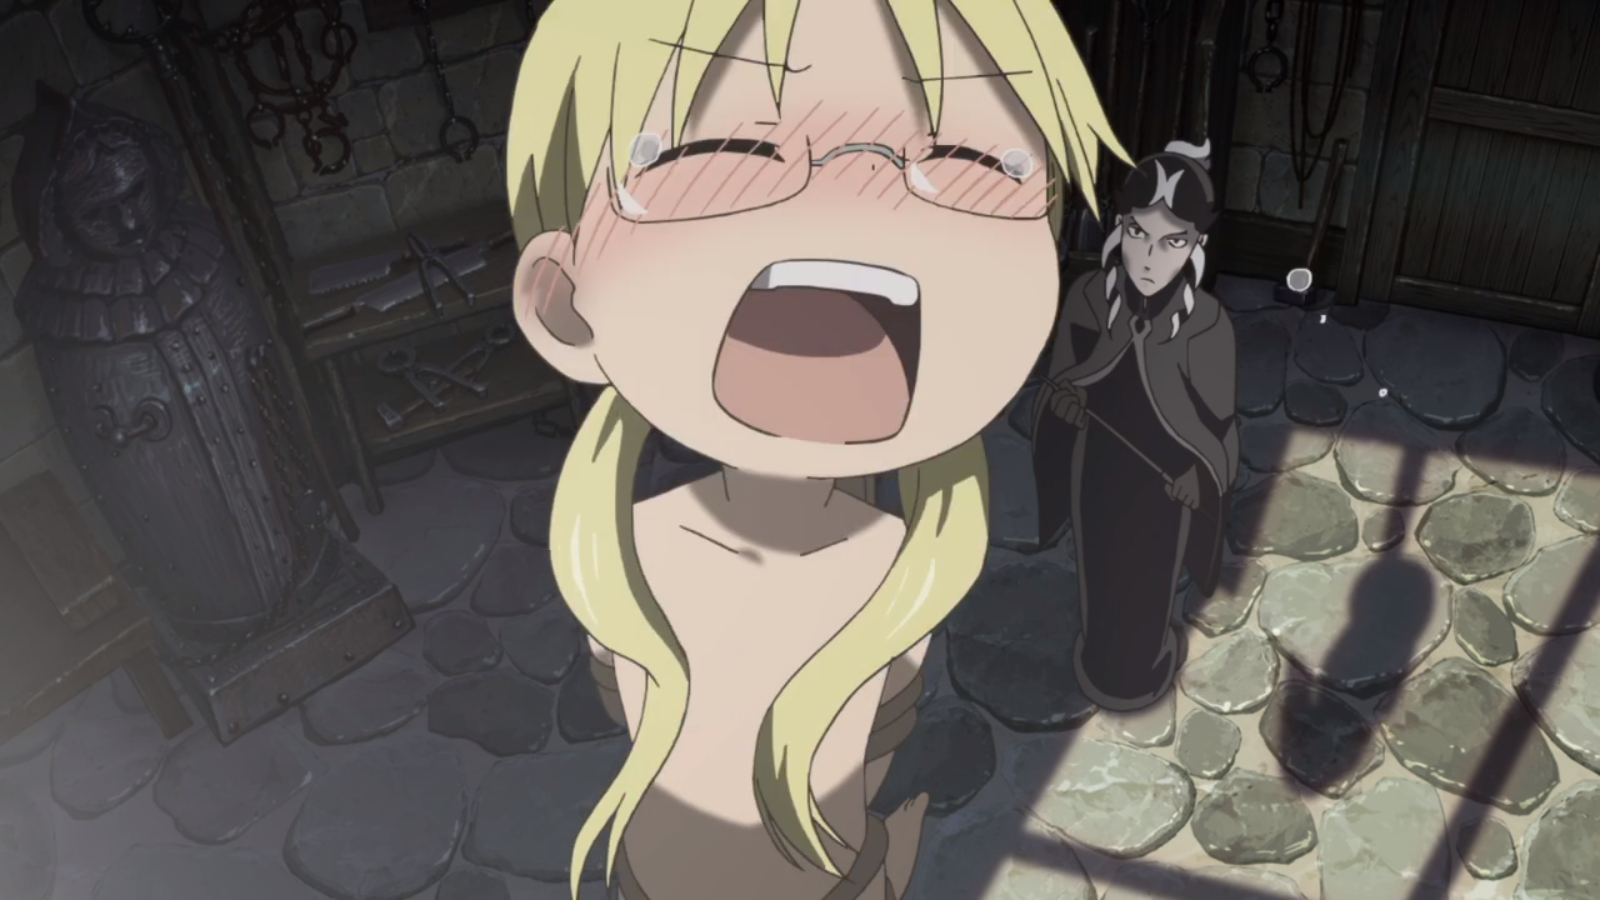 Made In Abyss Second Look Anime Evo nude pic, sex photos Made In Abyss...